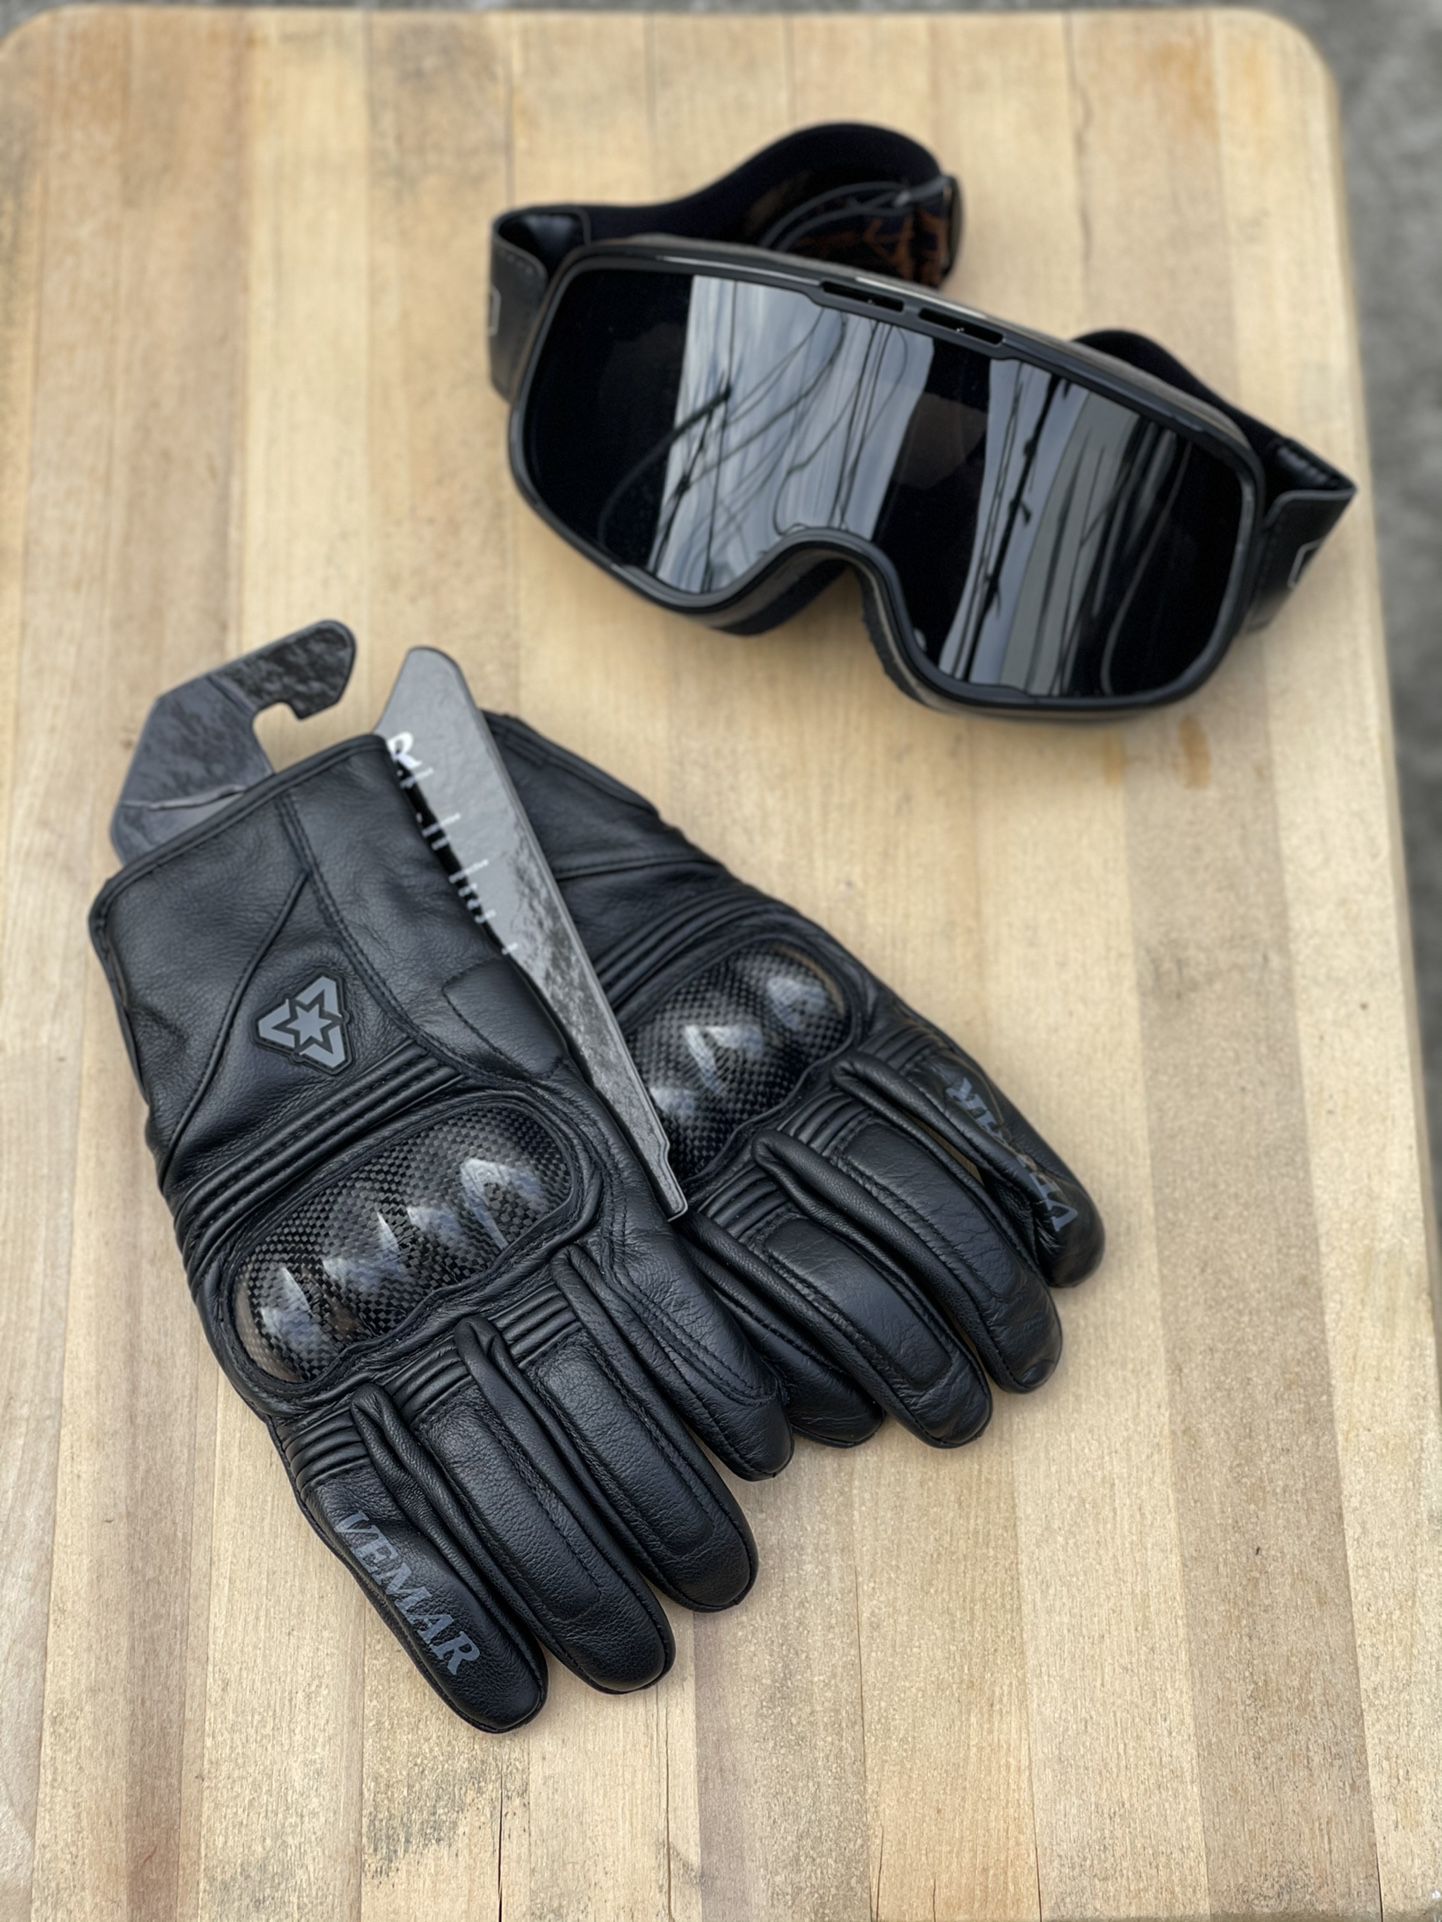 Motorcycle Leather Gloves And Goggles 